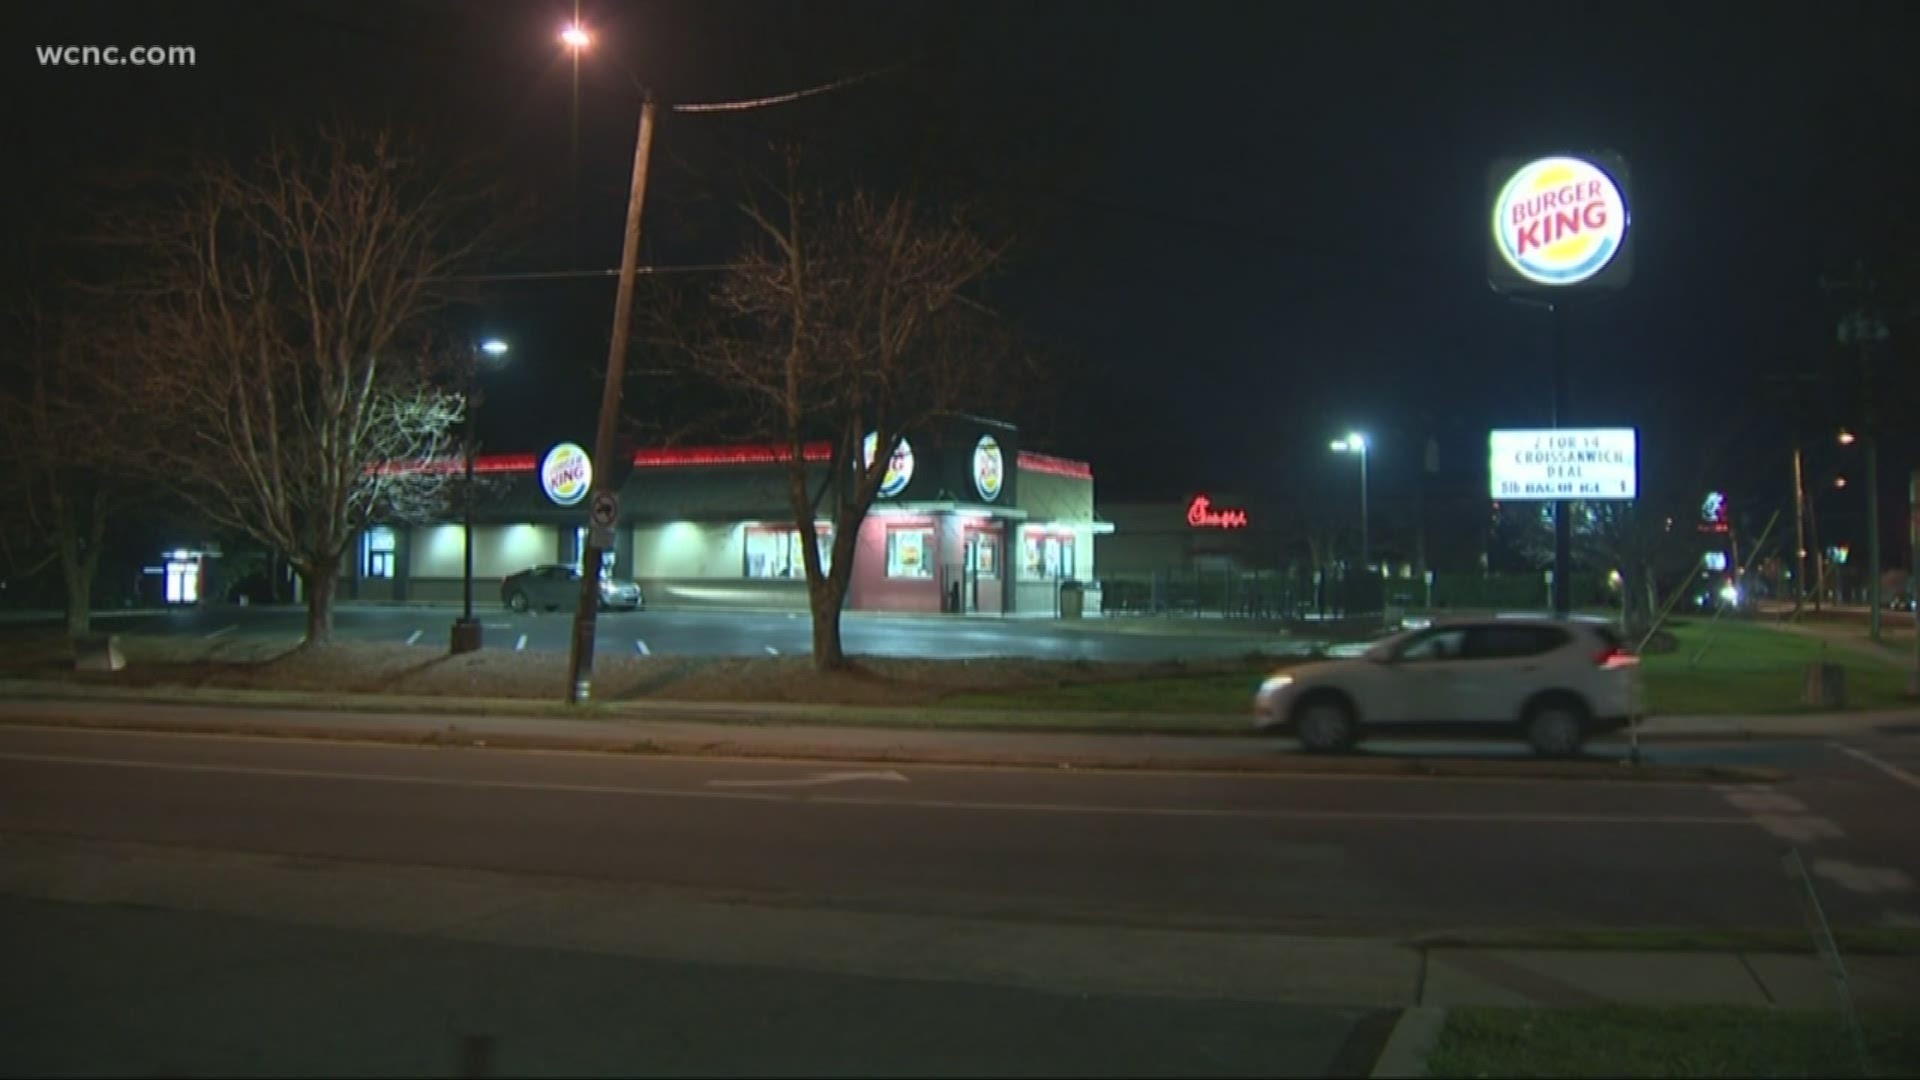 A caller told police that the victim entered the South End Burger King and said he had been stabbed.